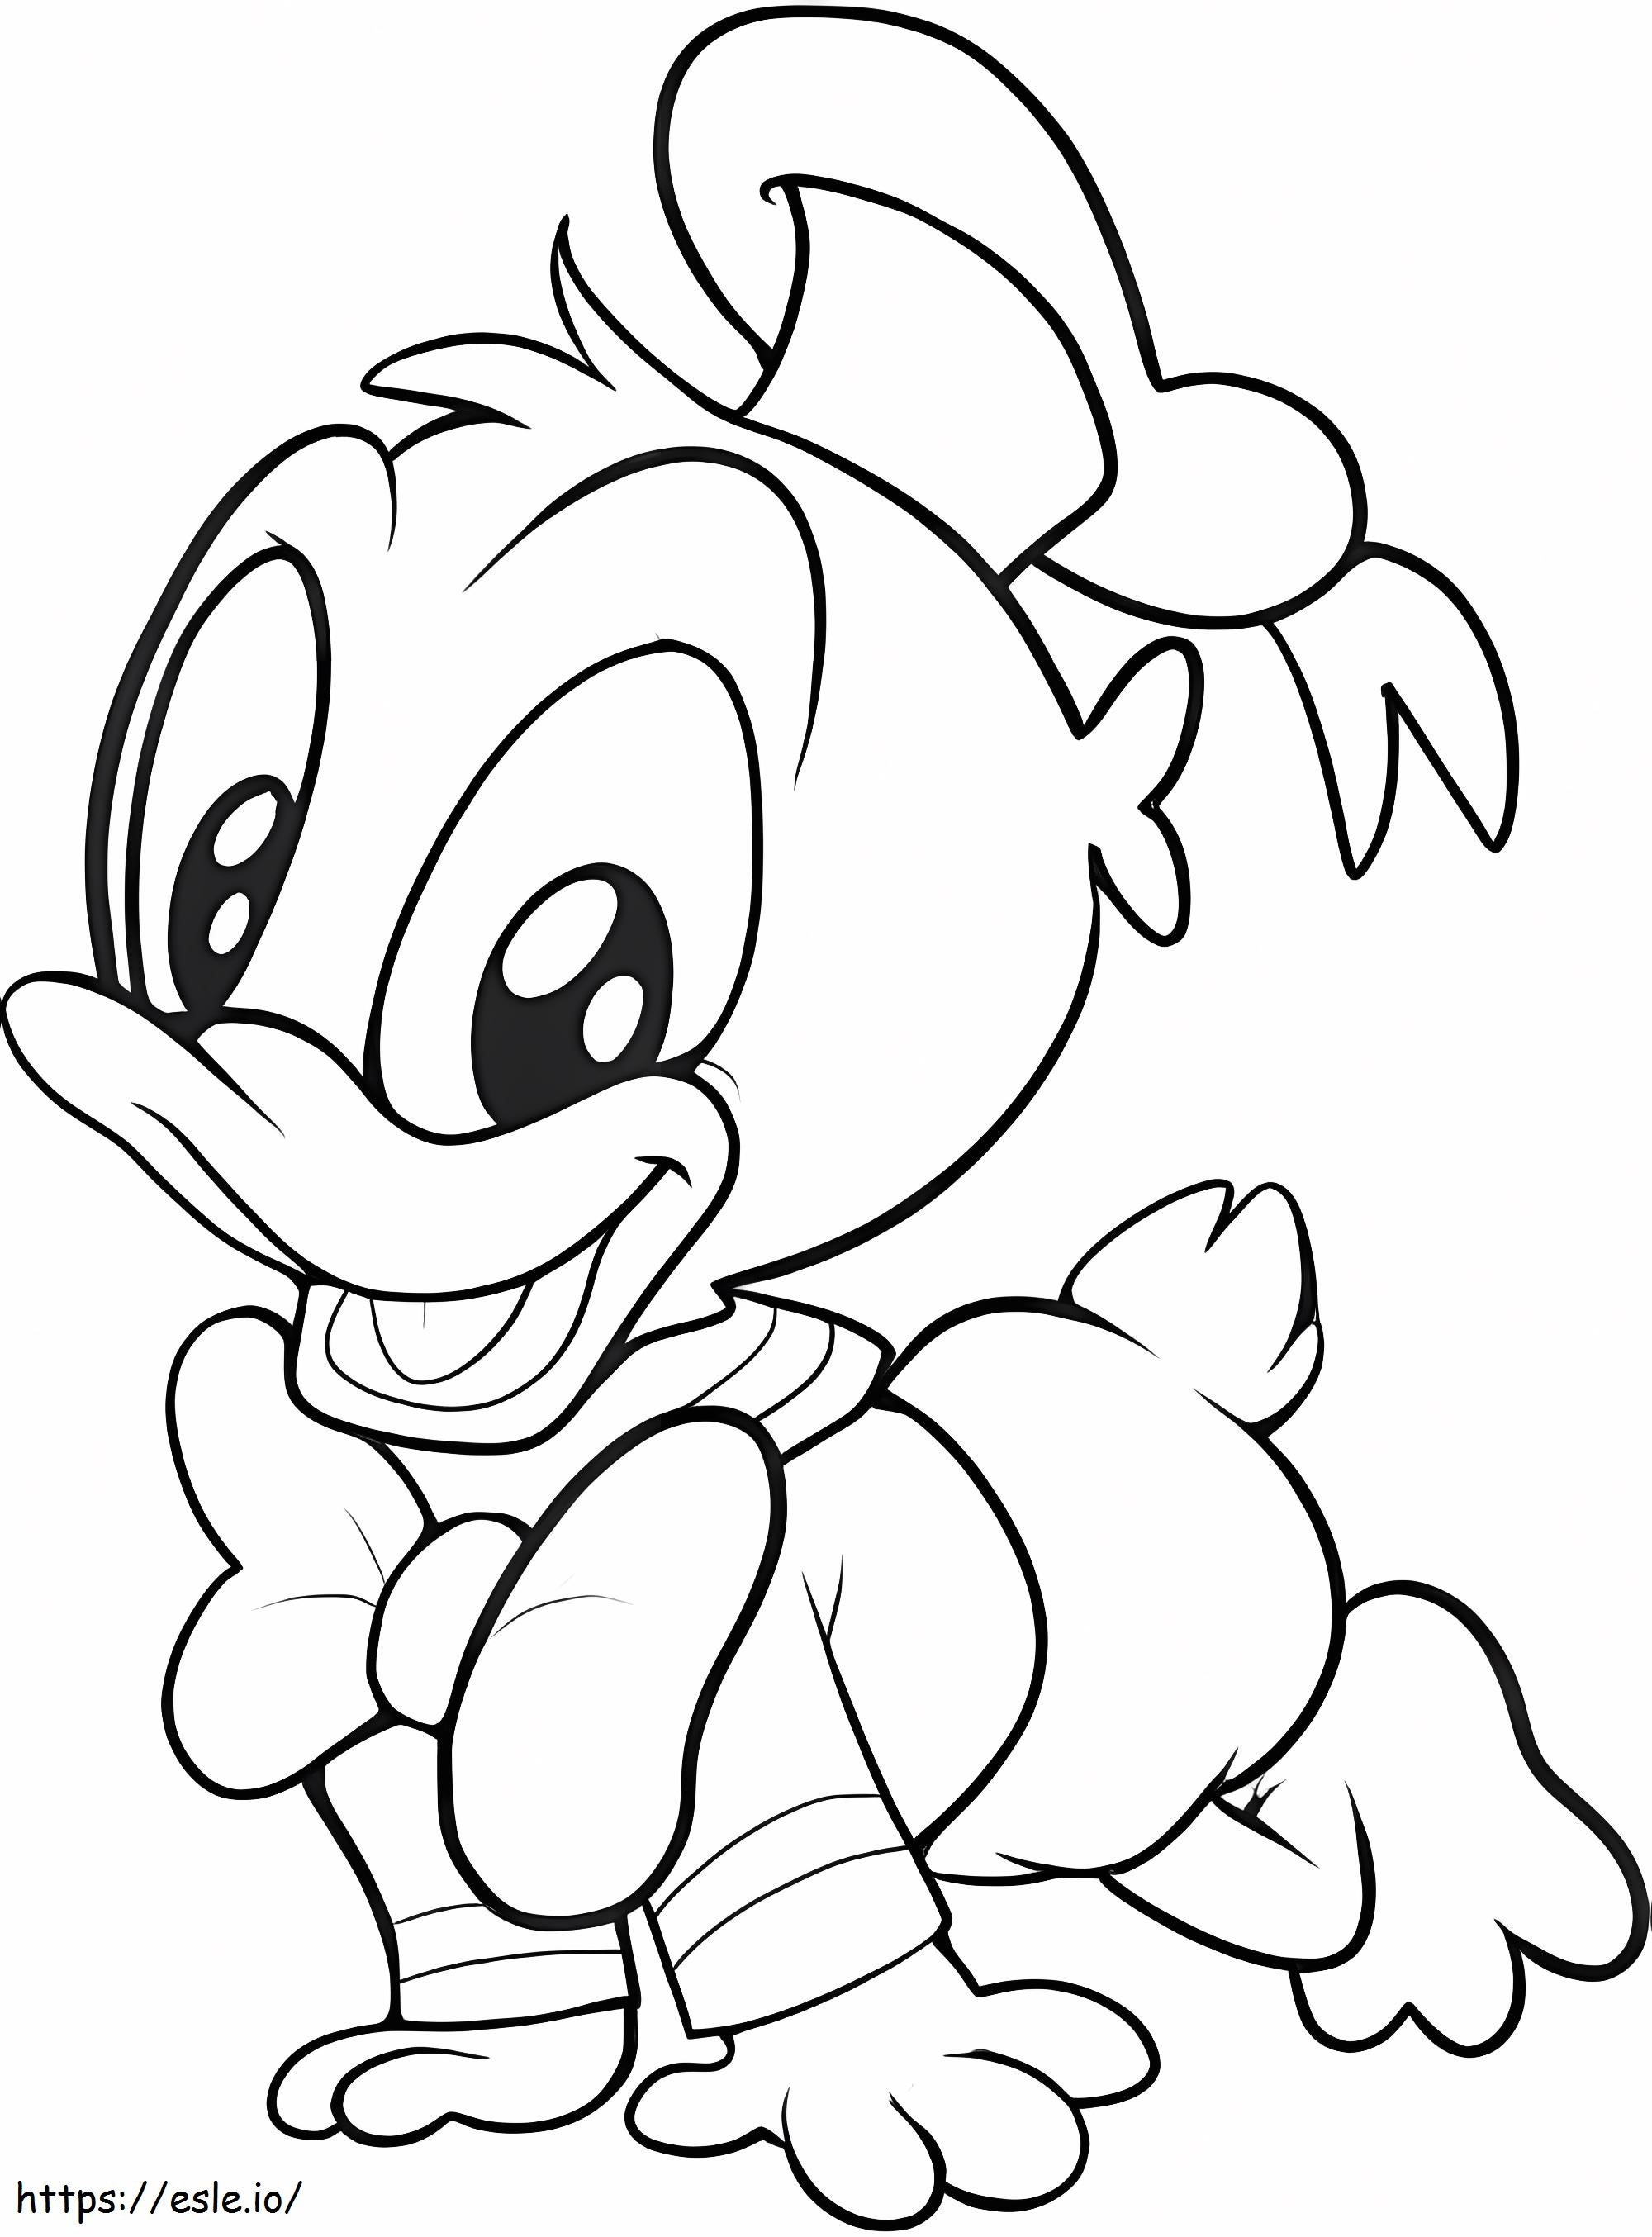 Adorable Disney Baby Donald coloring page